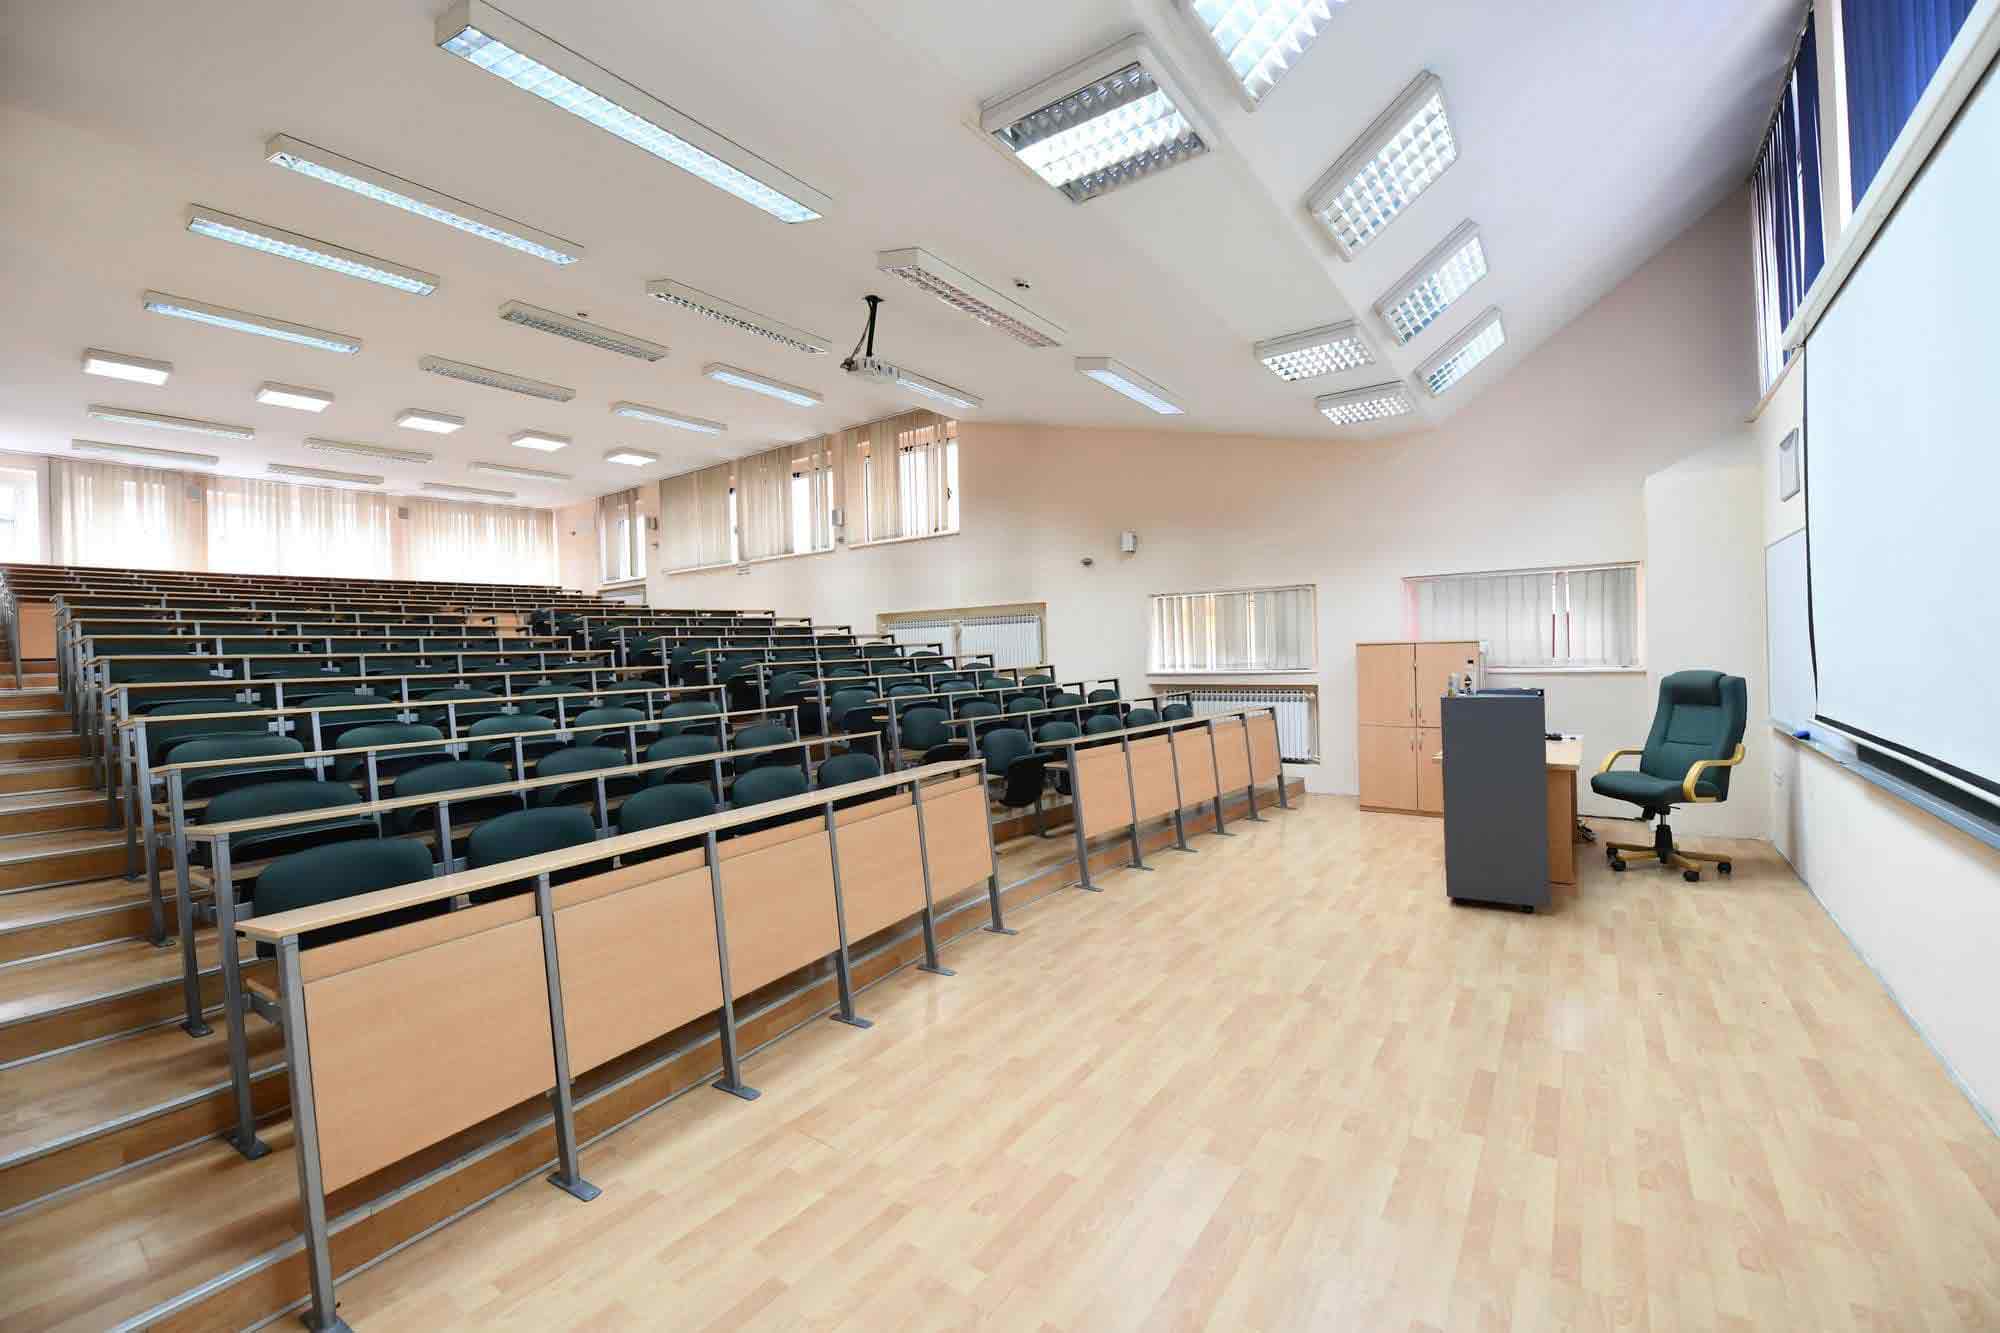 Classroom used for continuing education courses